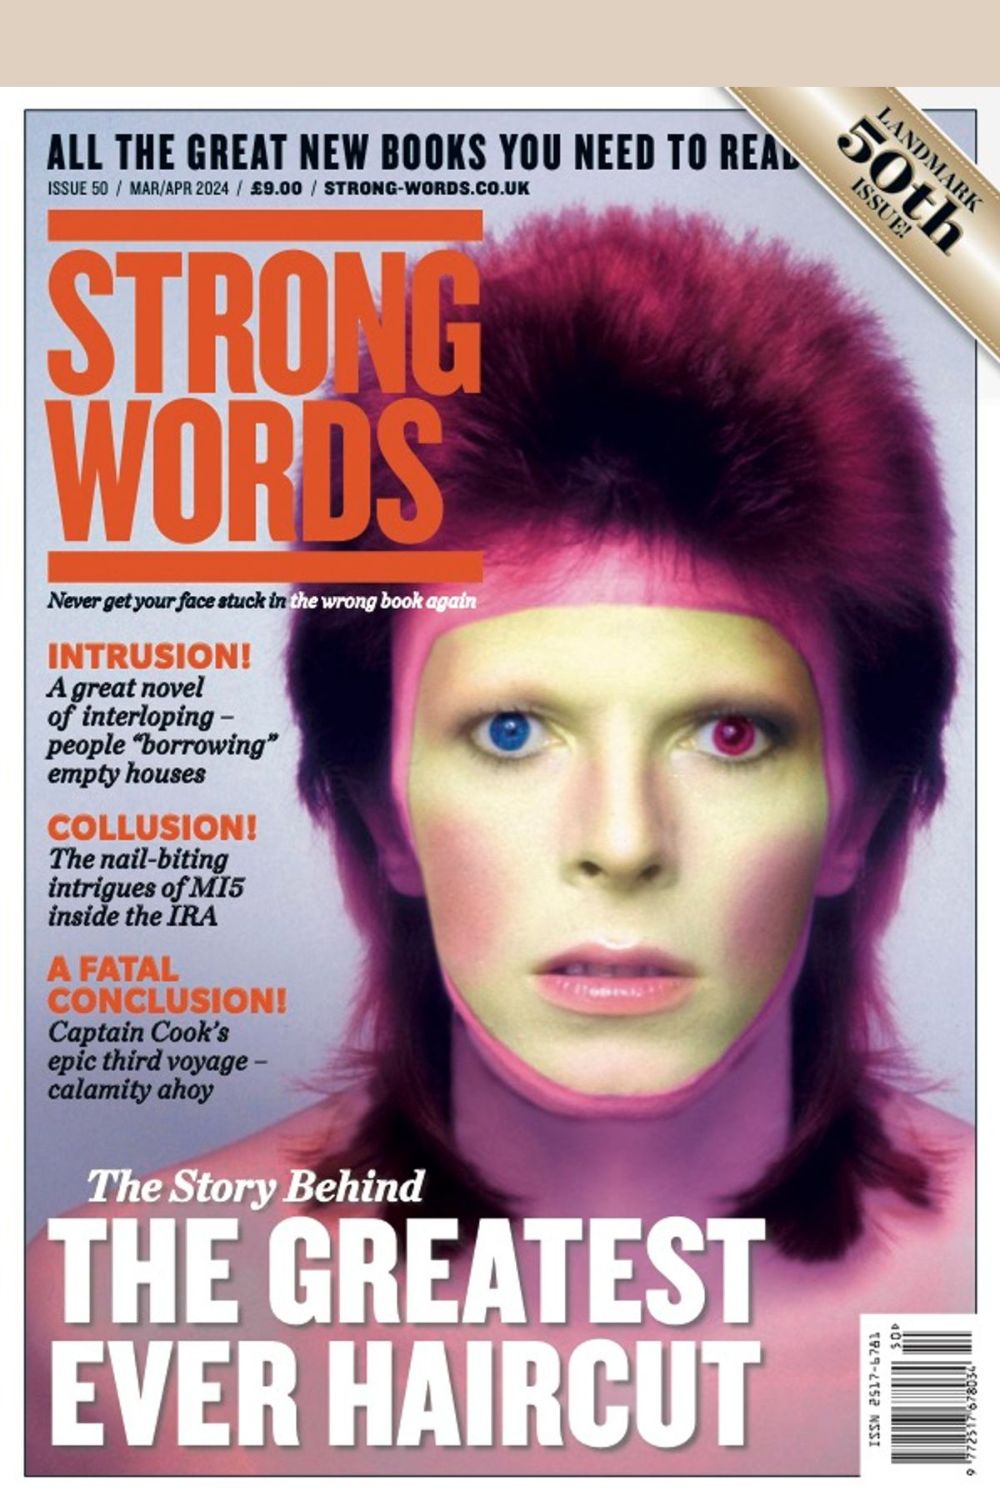 Strong Words Issue 50 cover with David Bowie)